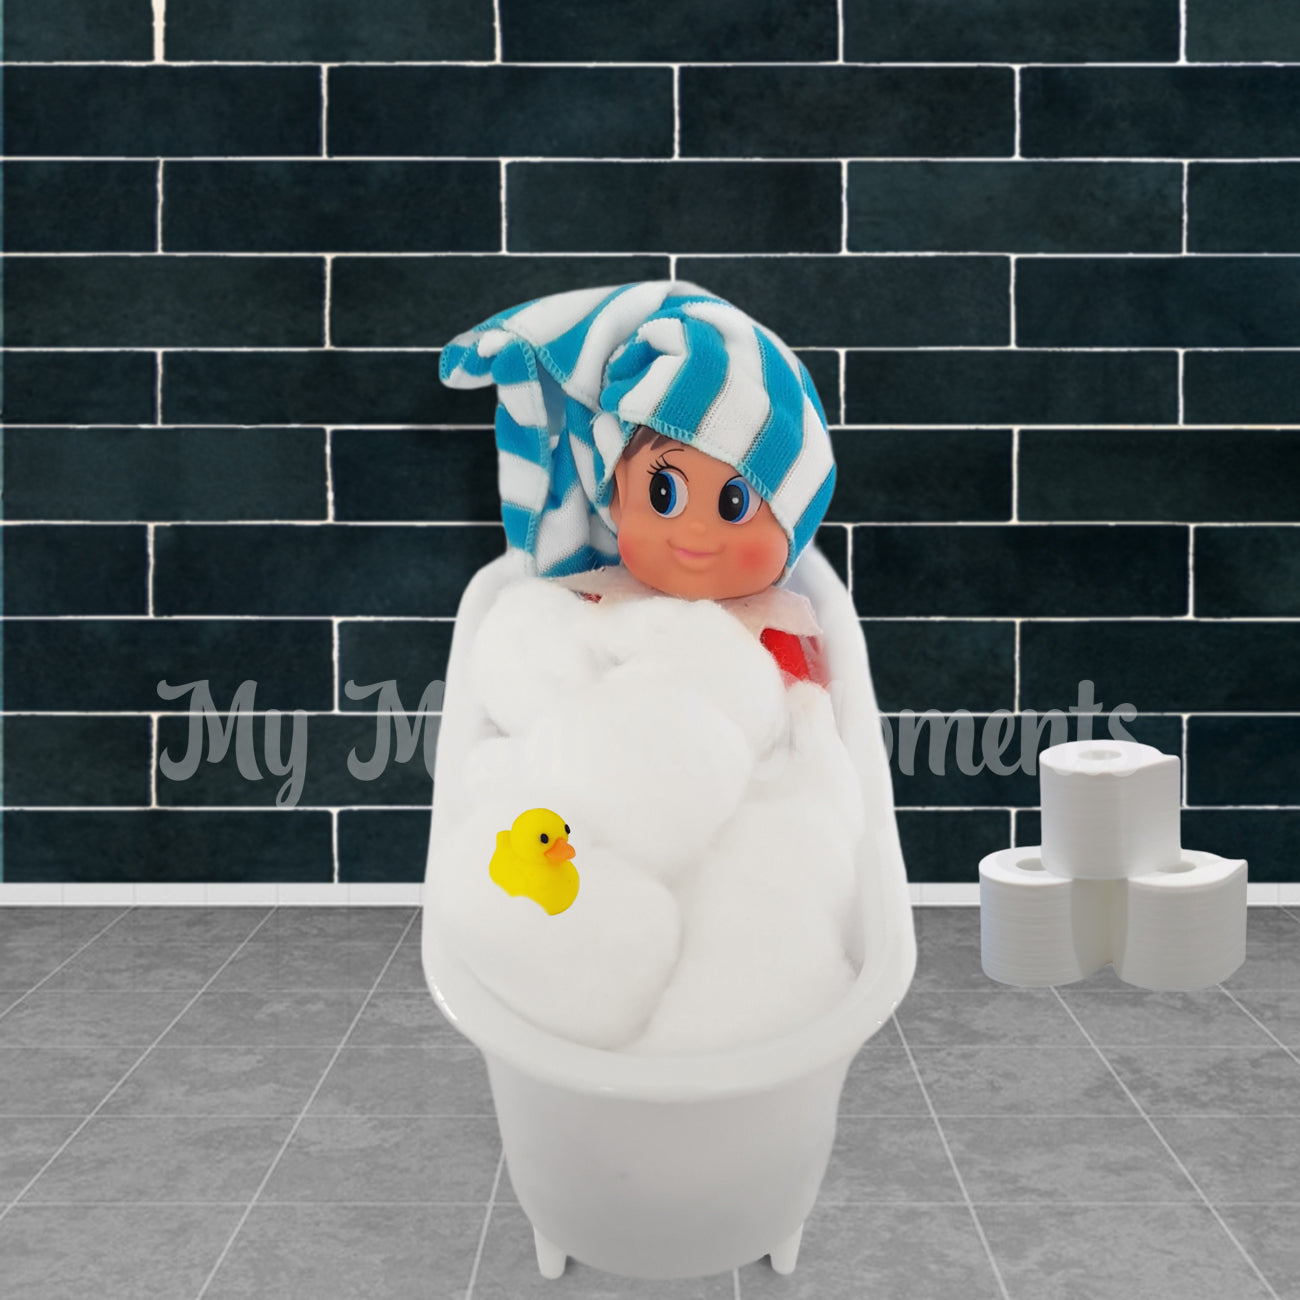 Bathtub prop with elf and rubber ducky, toilet paper. Featuring elves behavin badly elf